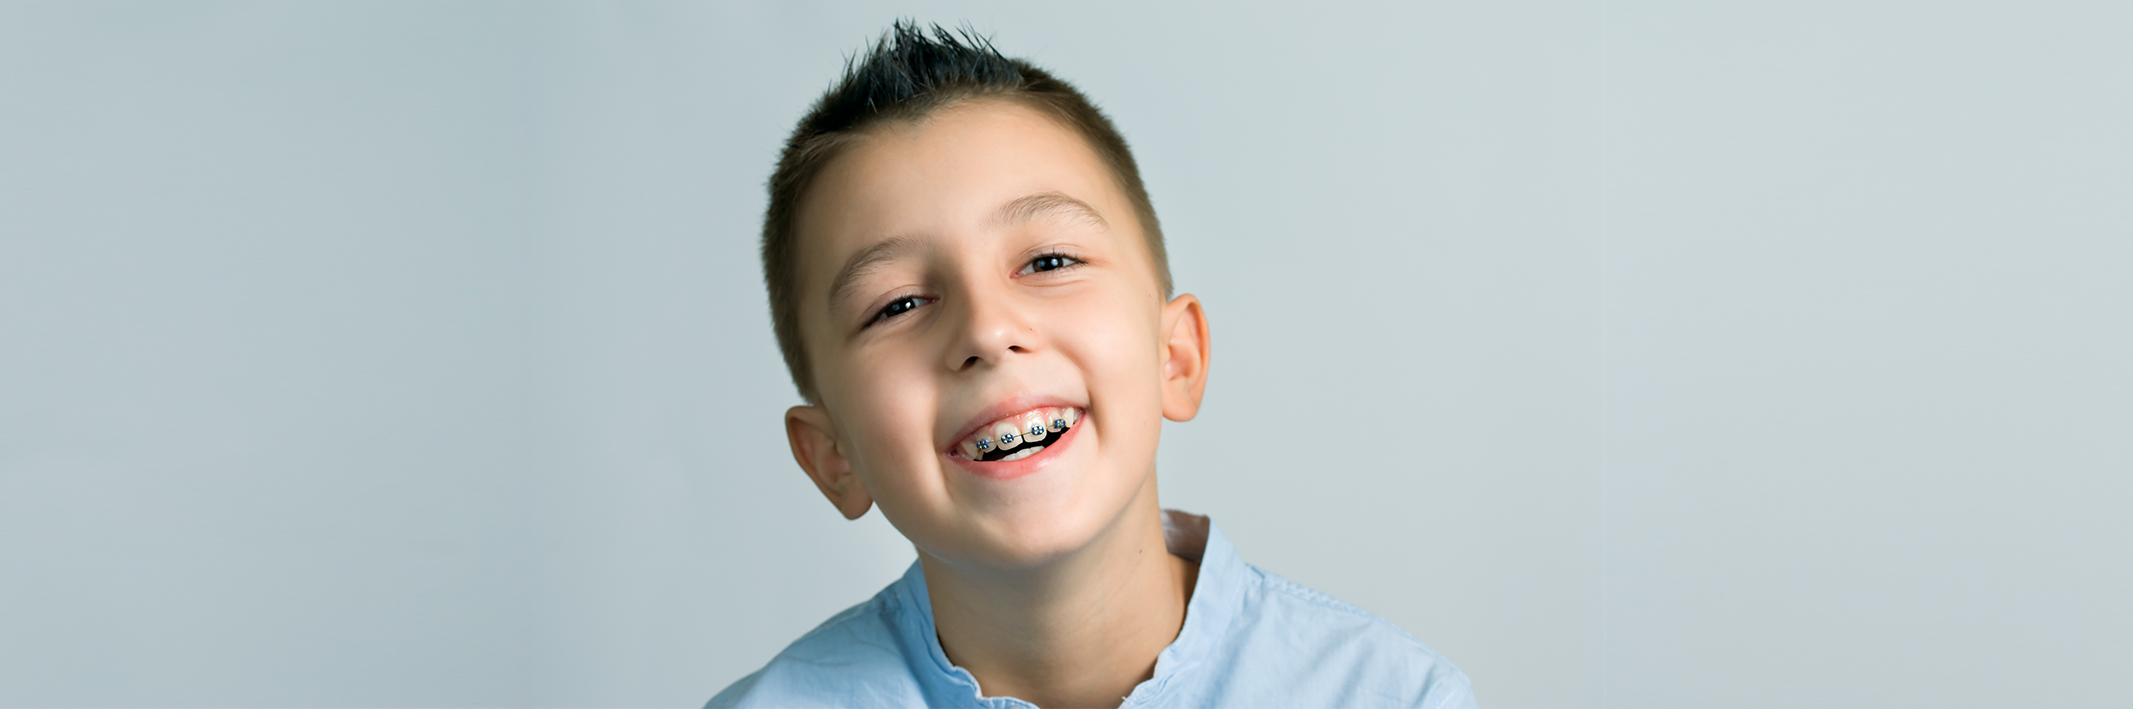 Early Orthodontic Treatment Is An Investment In Your Child’s Dental Health